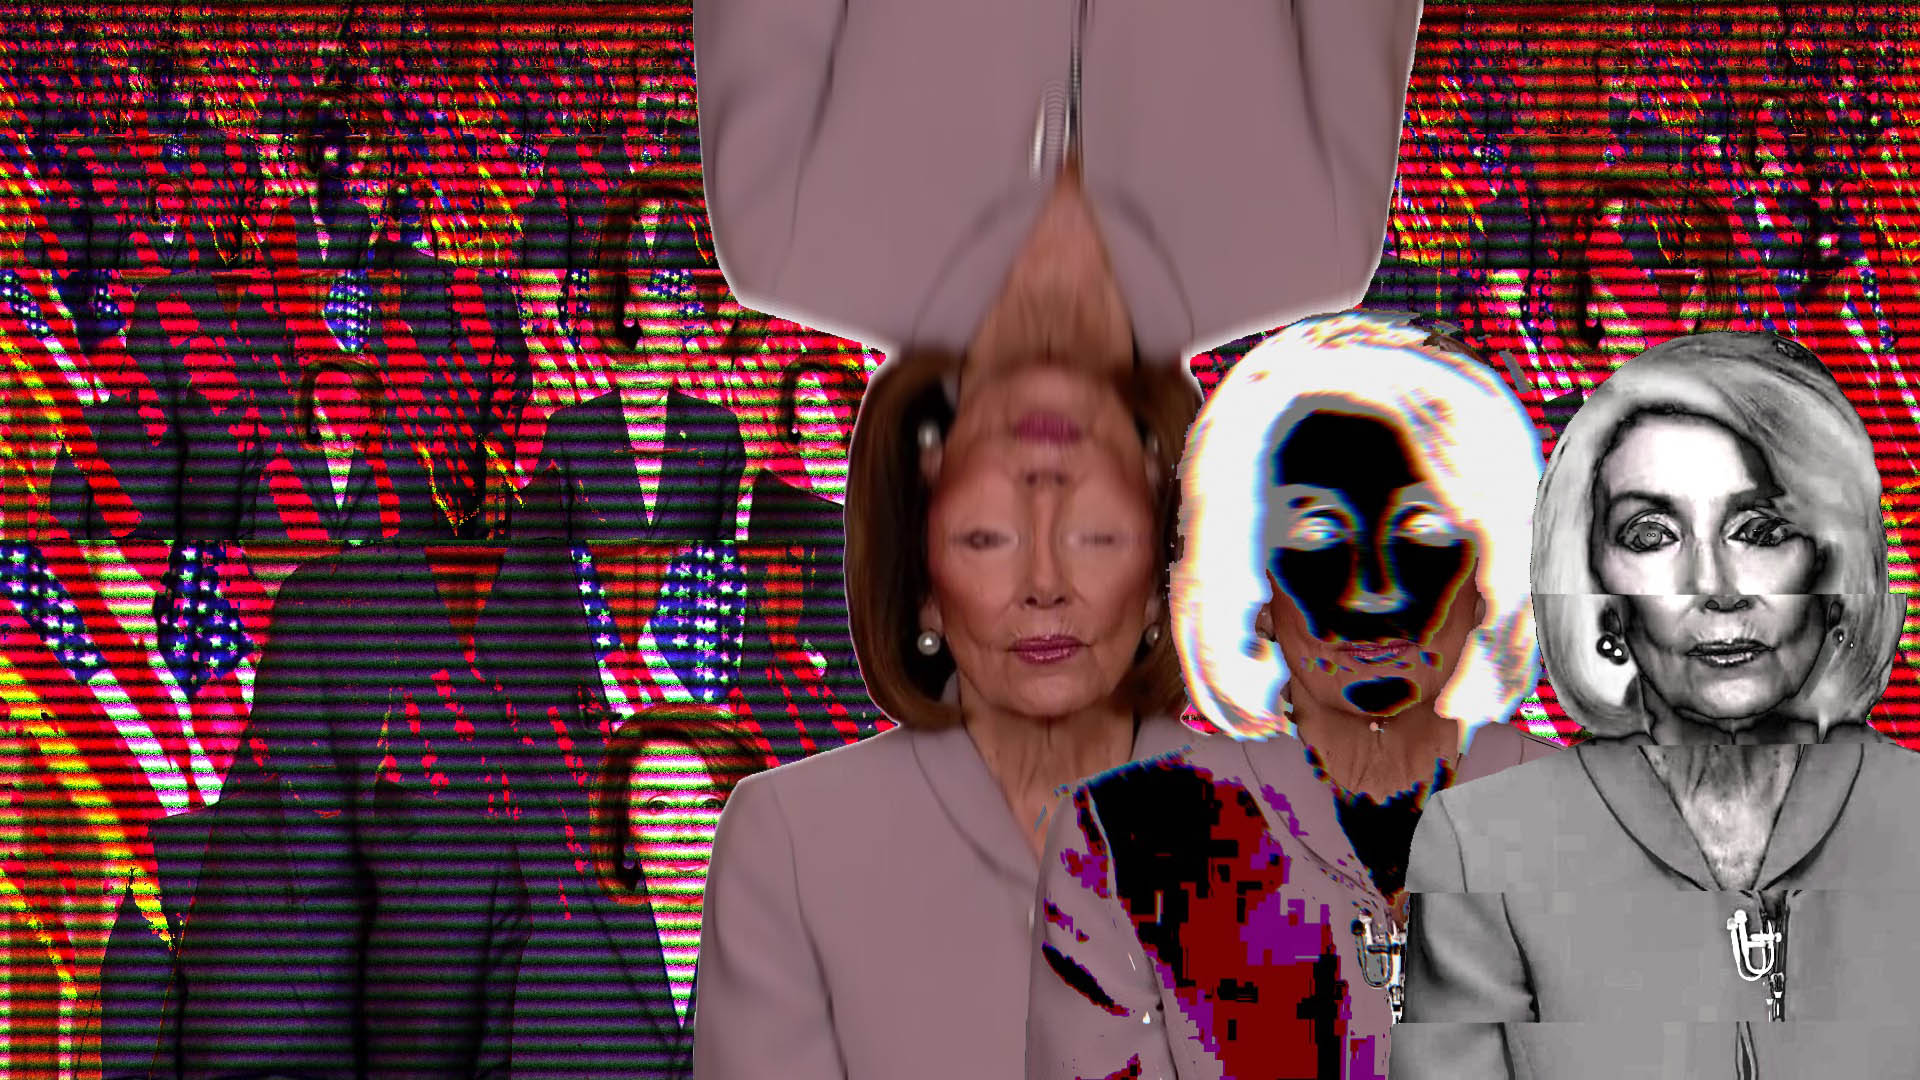 A bizarre and grotesque depiction of Speaker Nancy Pelosi